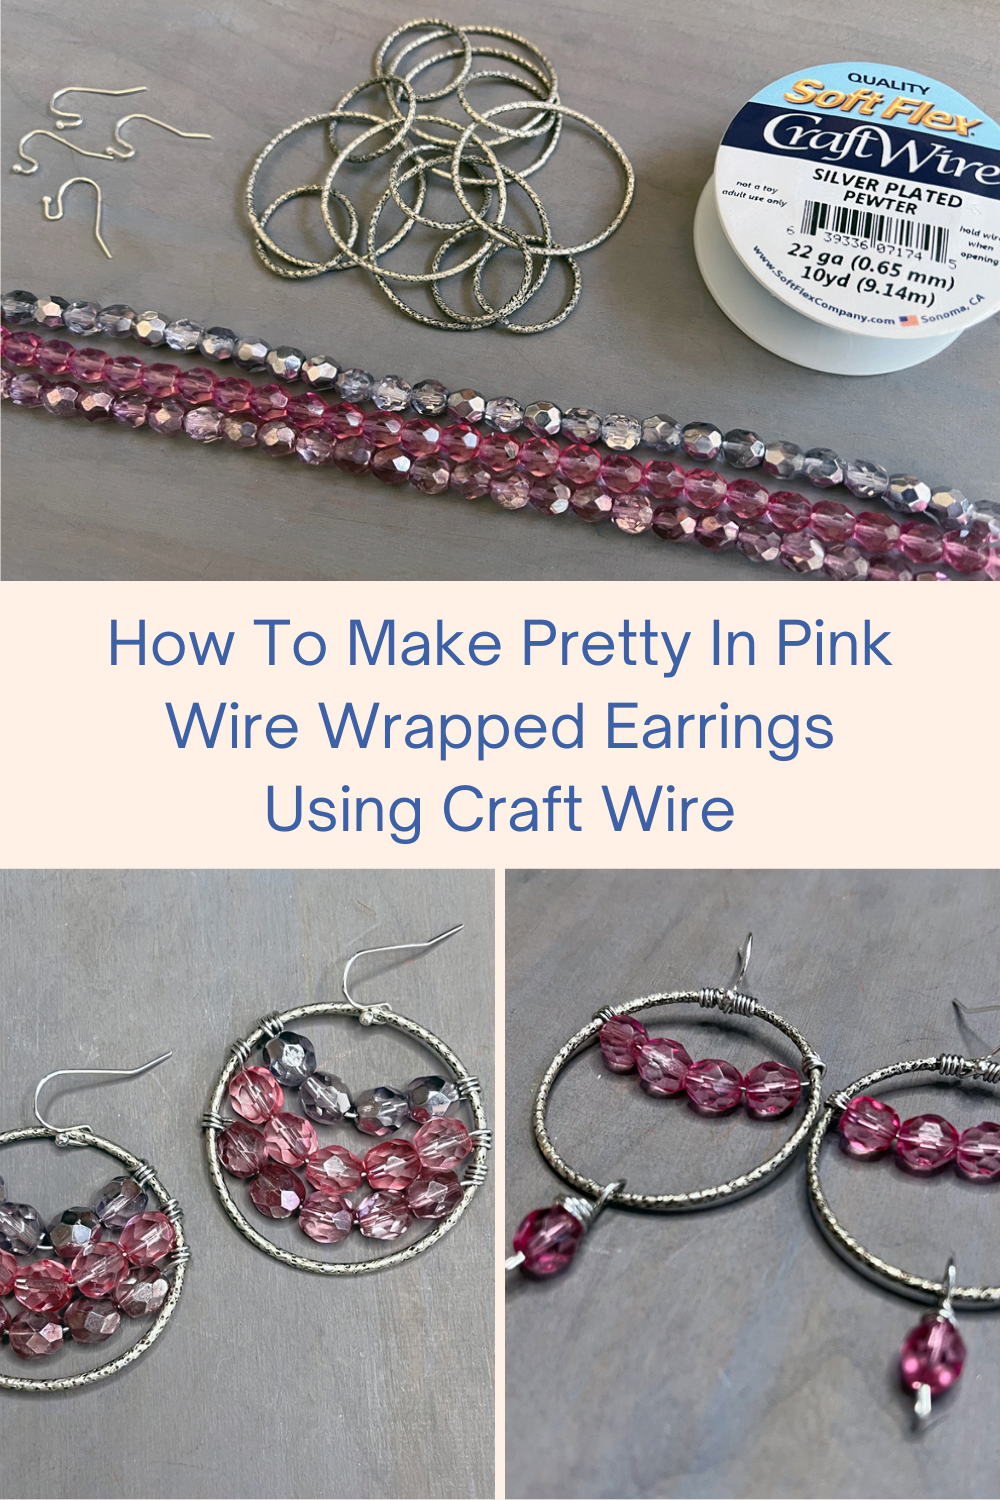 How To Make Pretty In Pink Wire Wrapped Earrings Using Craft Wire Collage